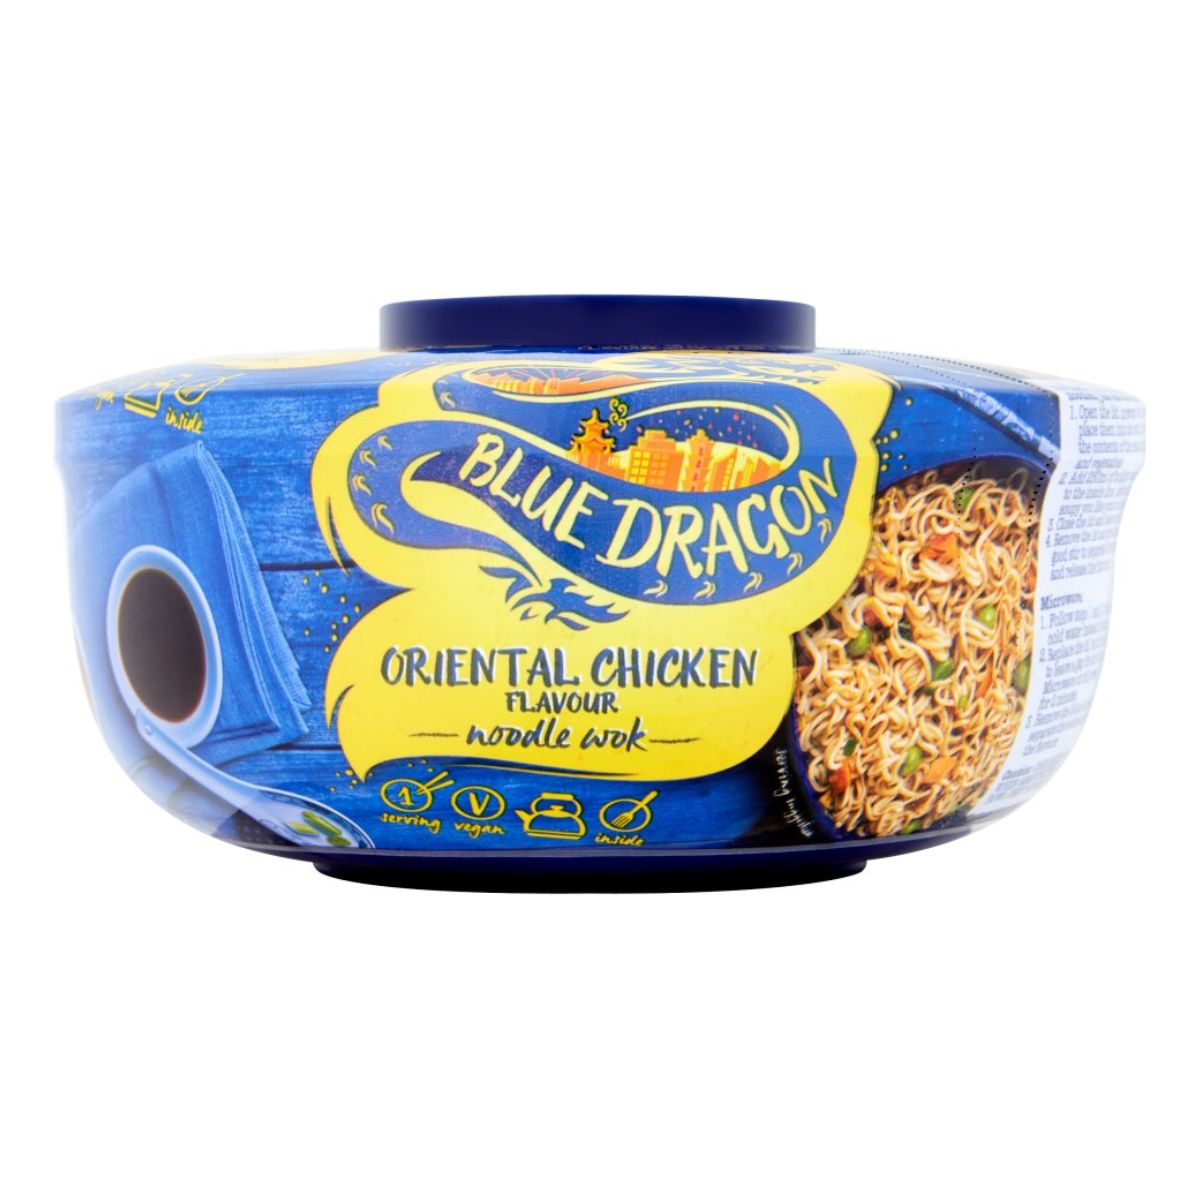 Blue Dragon - Oriental Chicken Flavour Noodle Wok - 65g in a can.